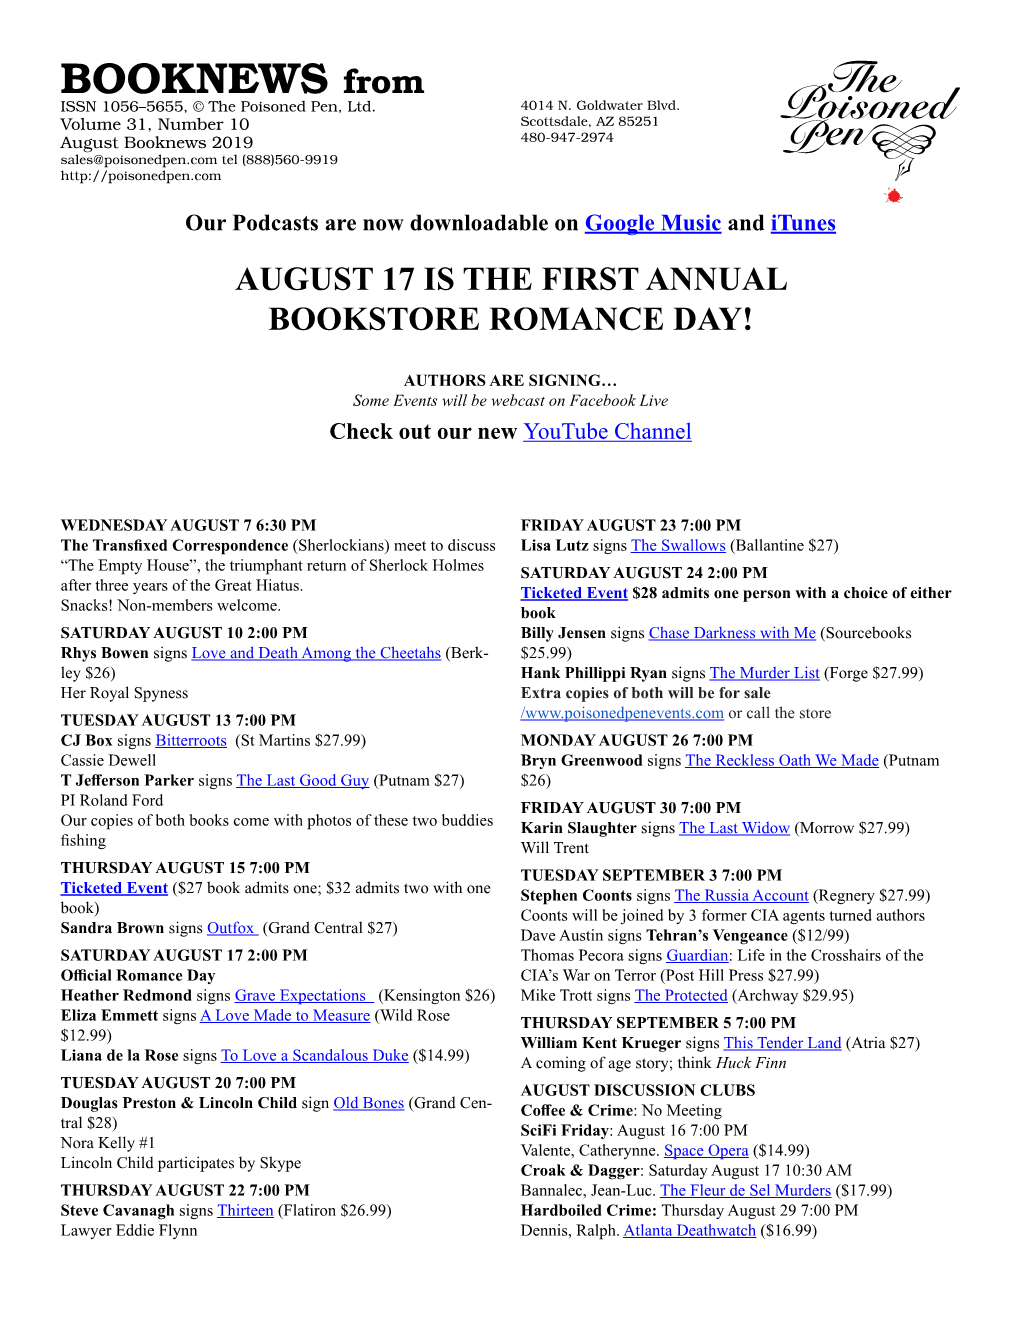 BOOKNEWS from ISSN 1056–5655, © the Poisoned Pen, Ltd